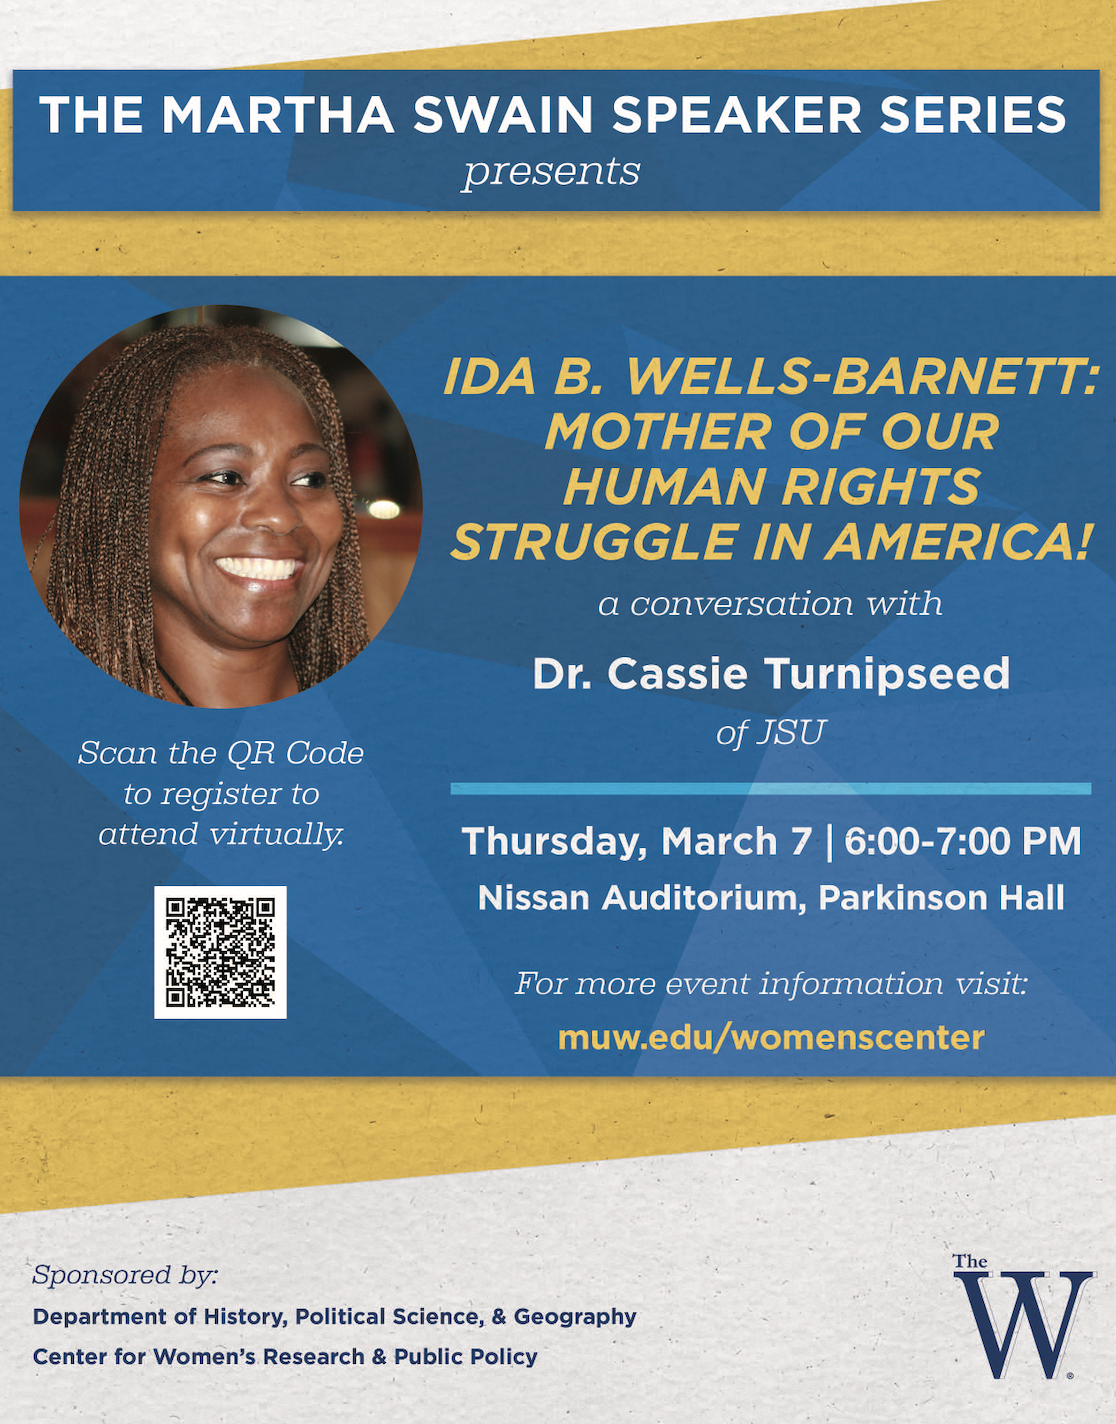 The Martha Swain Speaker Series conversation with our author Dr. Cassie Turnipseed